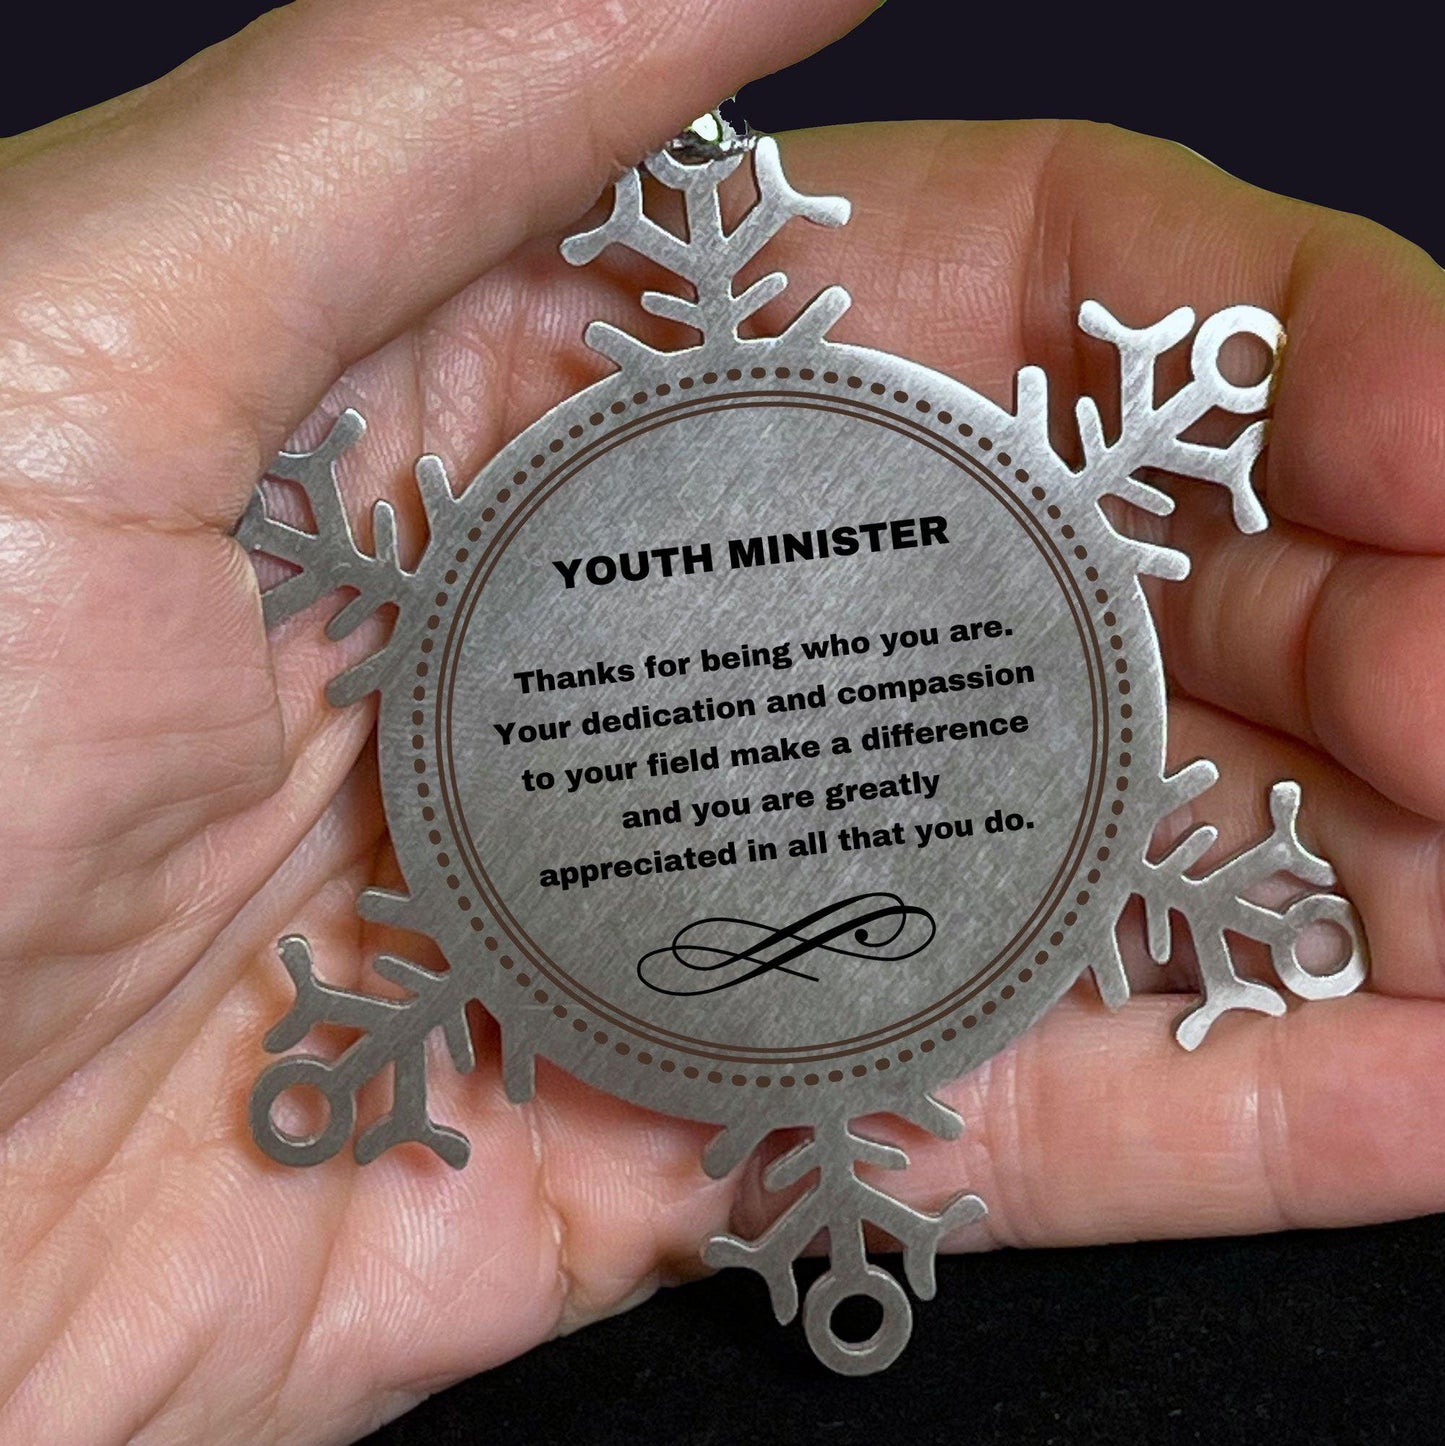 Youth Minister Snowflake Ornament - Thanks for being who you are - Birthday Christmas Jewelry Gifts Coworkers Colleague Boss - Mallard Moon Gift Shop